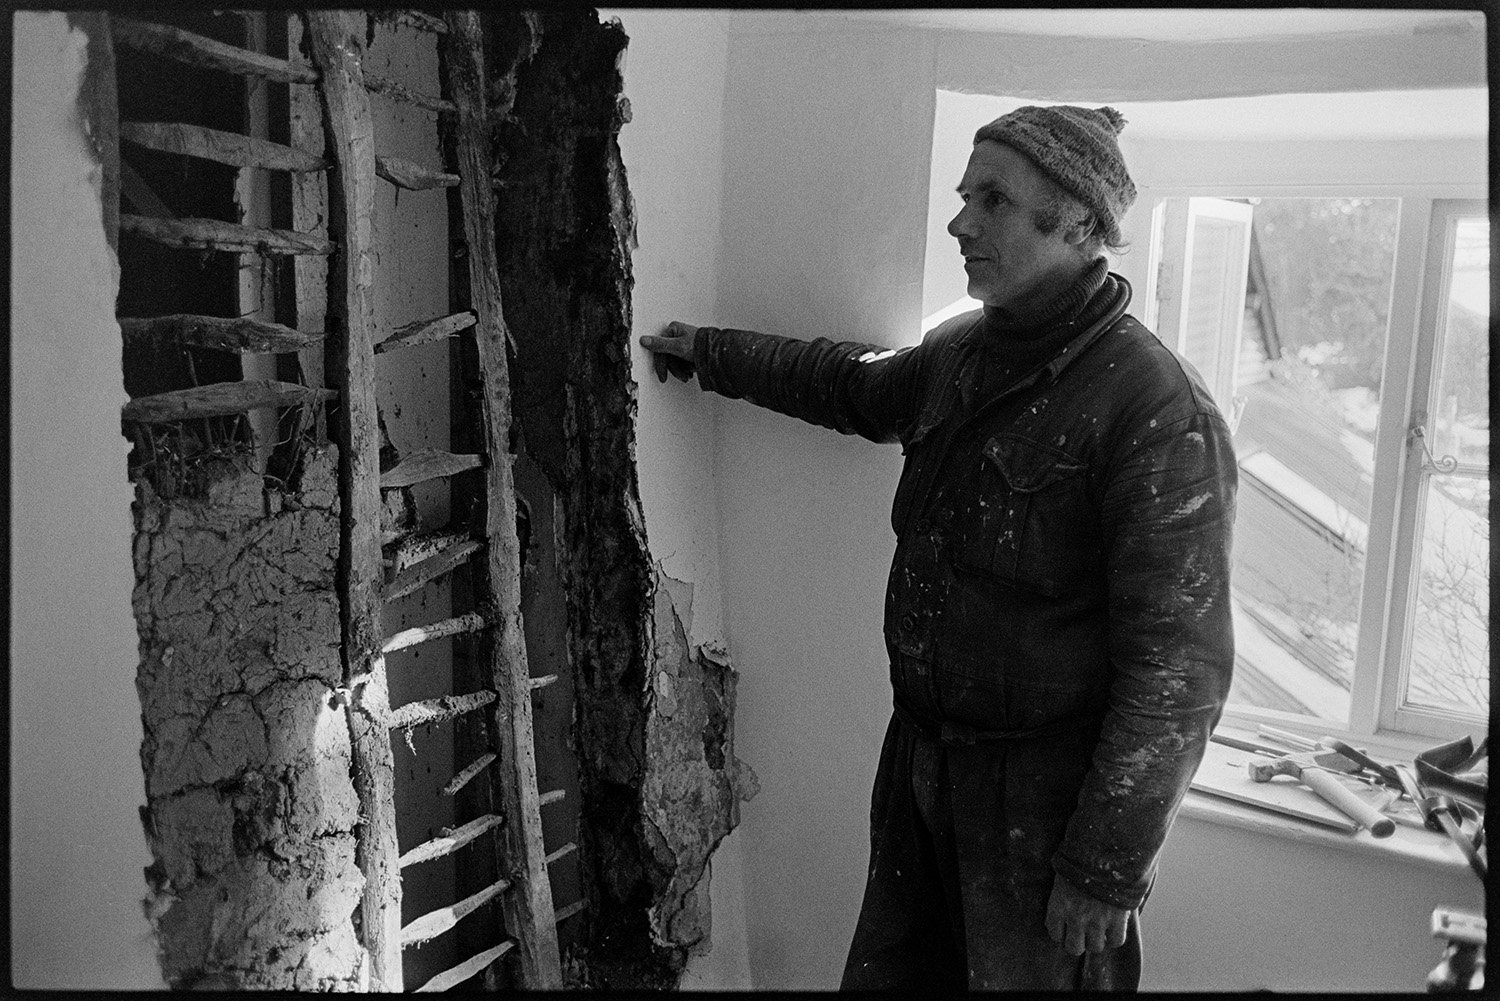 Old lathe and plaster wall with unusual timber work. 
[Derek Marden looking at a wall with exposed timber work and plaster, at a house called Merrymeet, Dolton.]